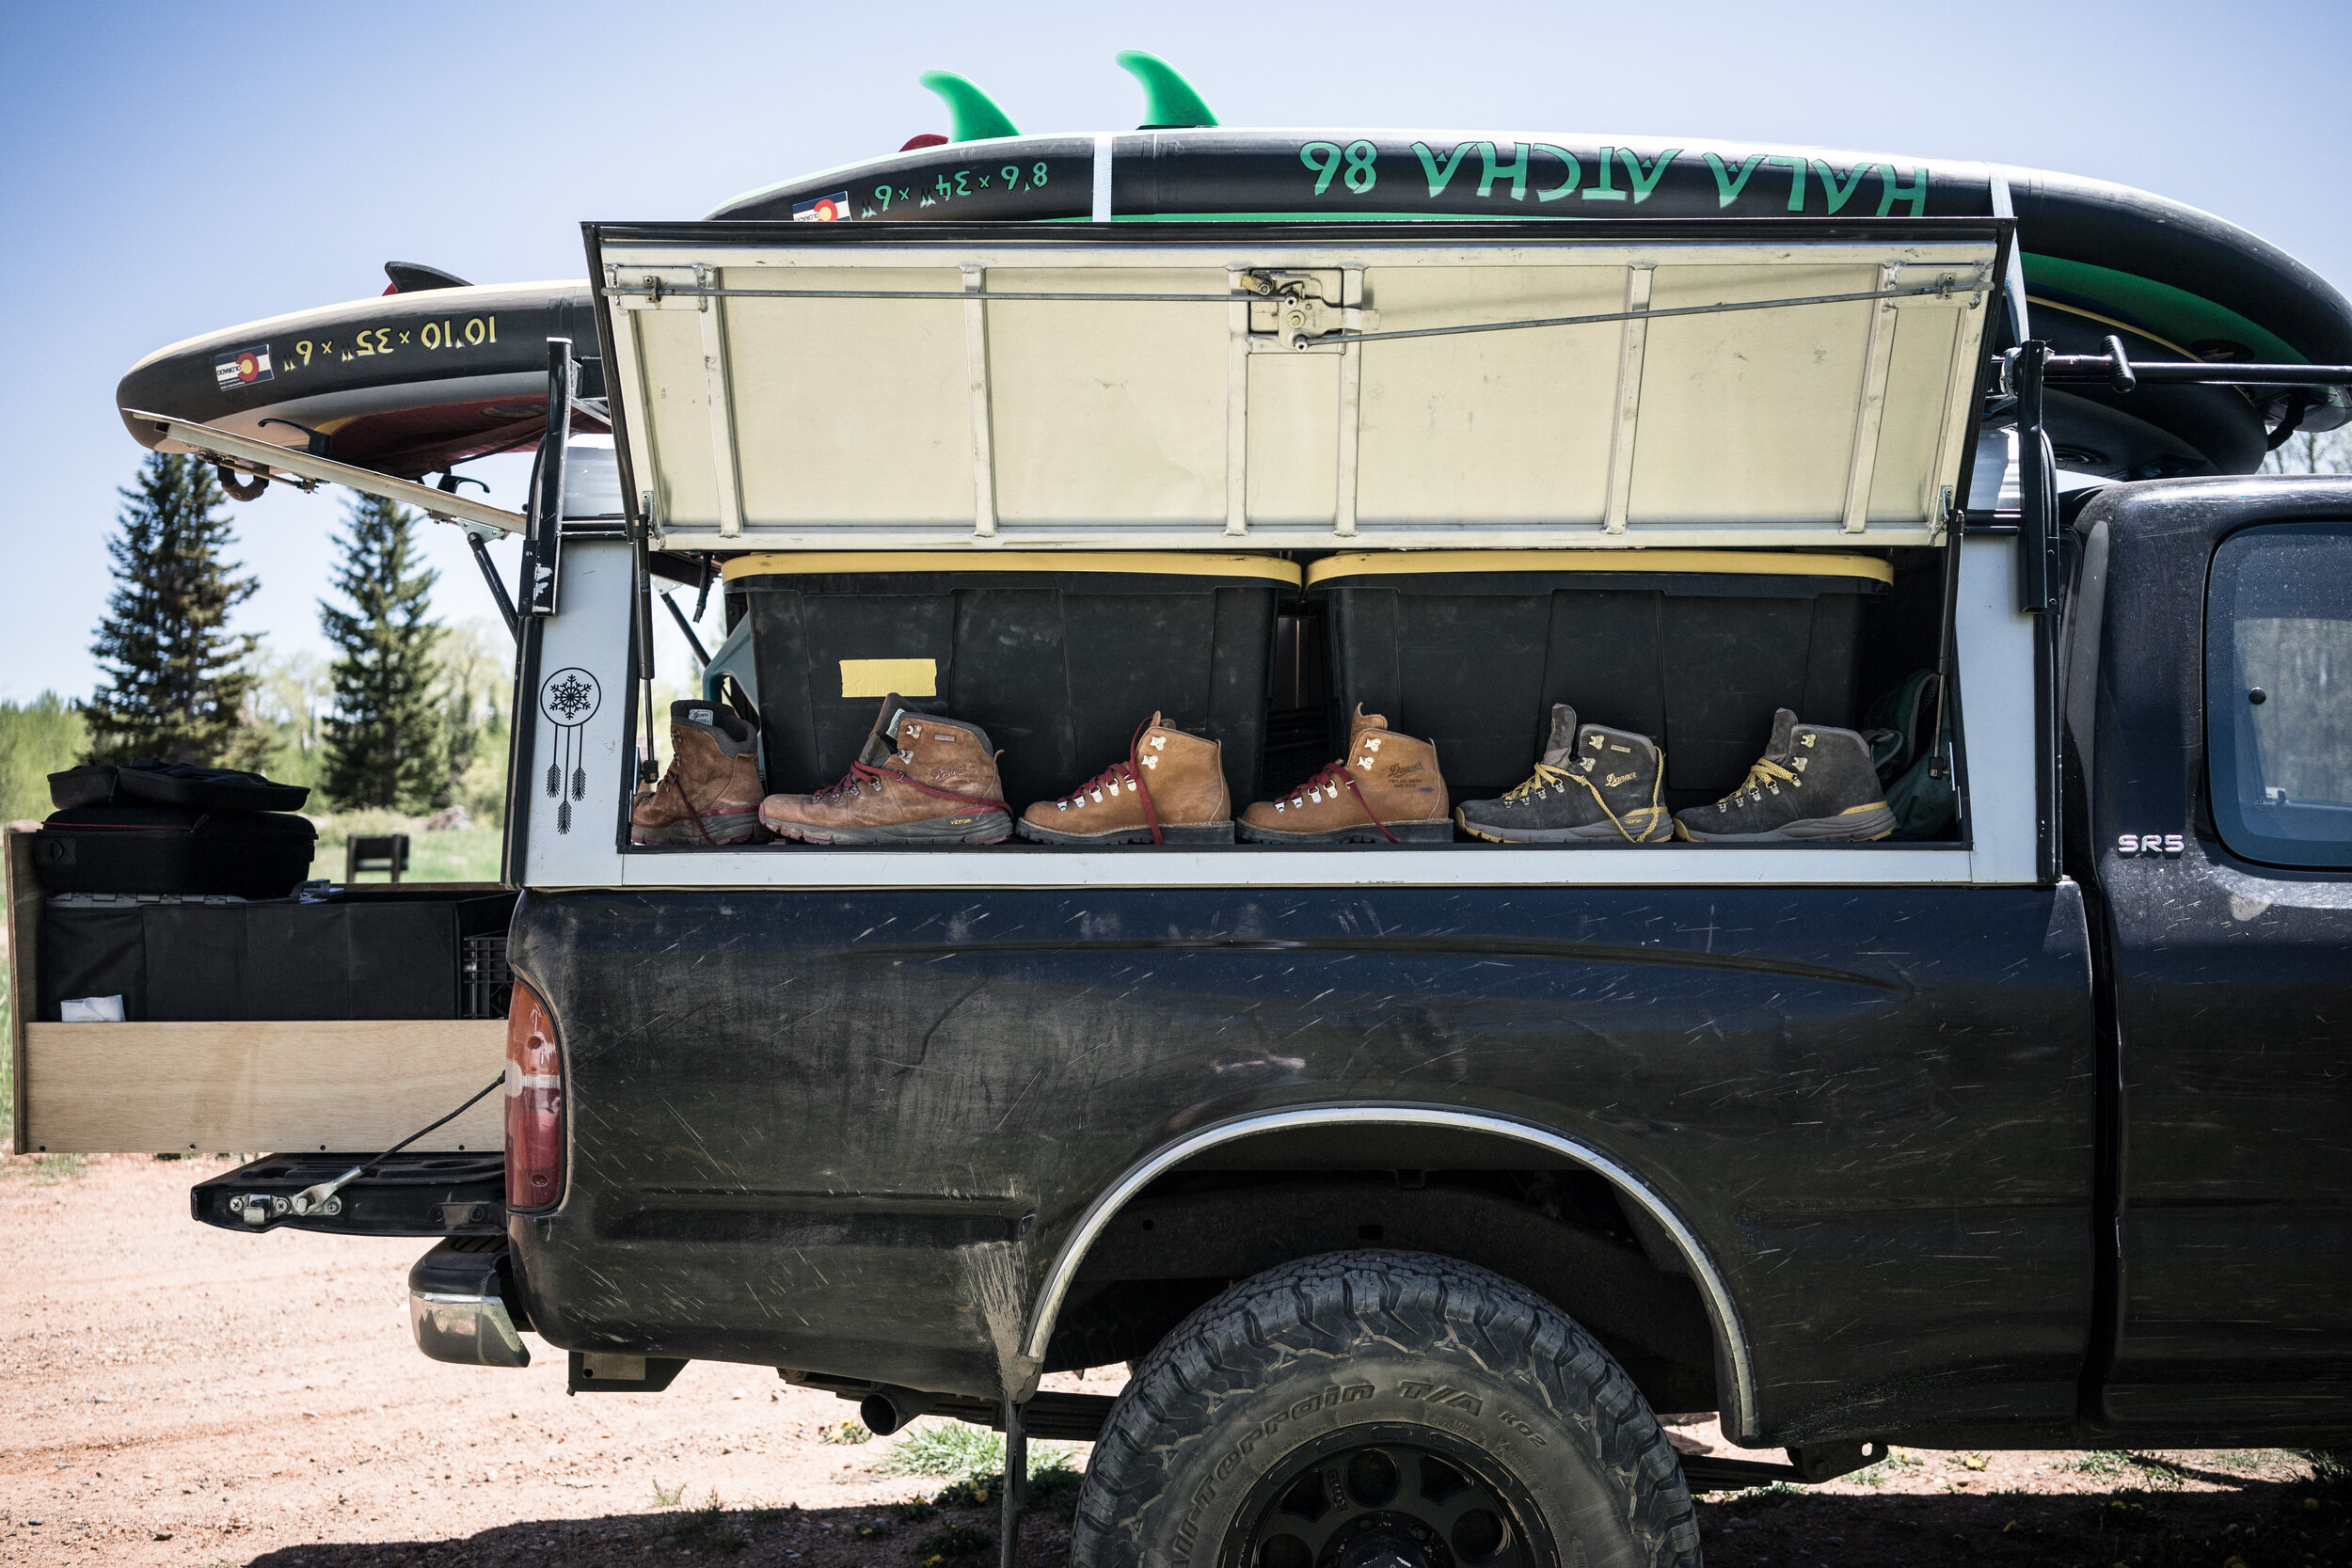 Danner Boot collection in our adventure rig.